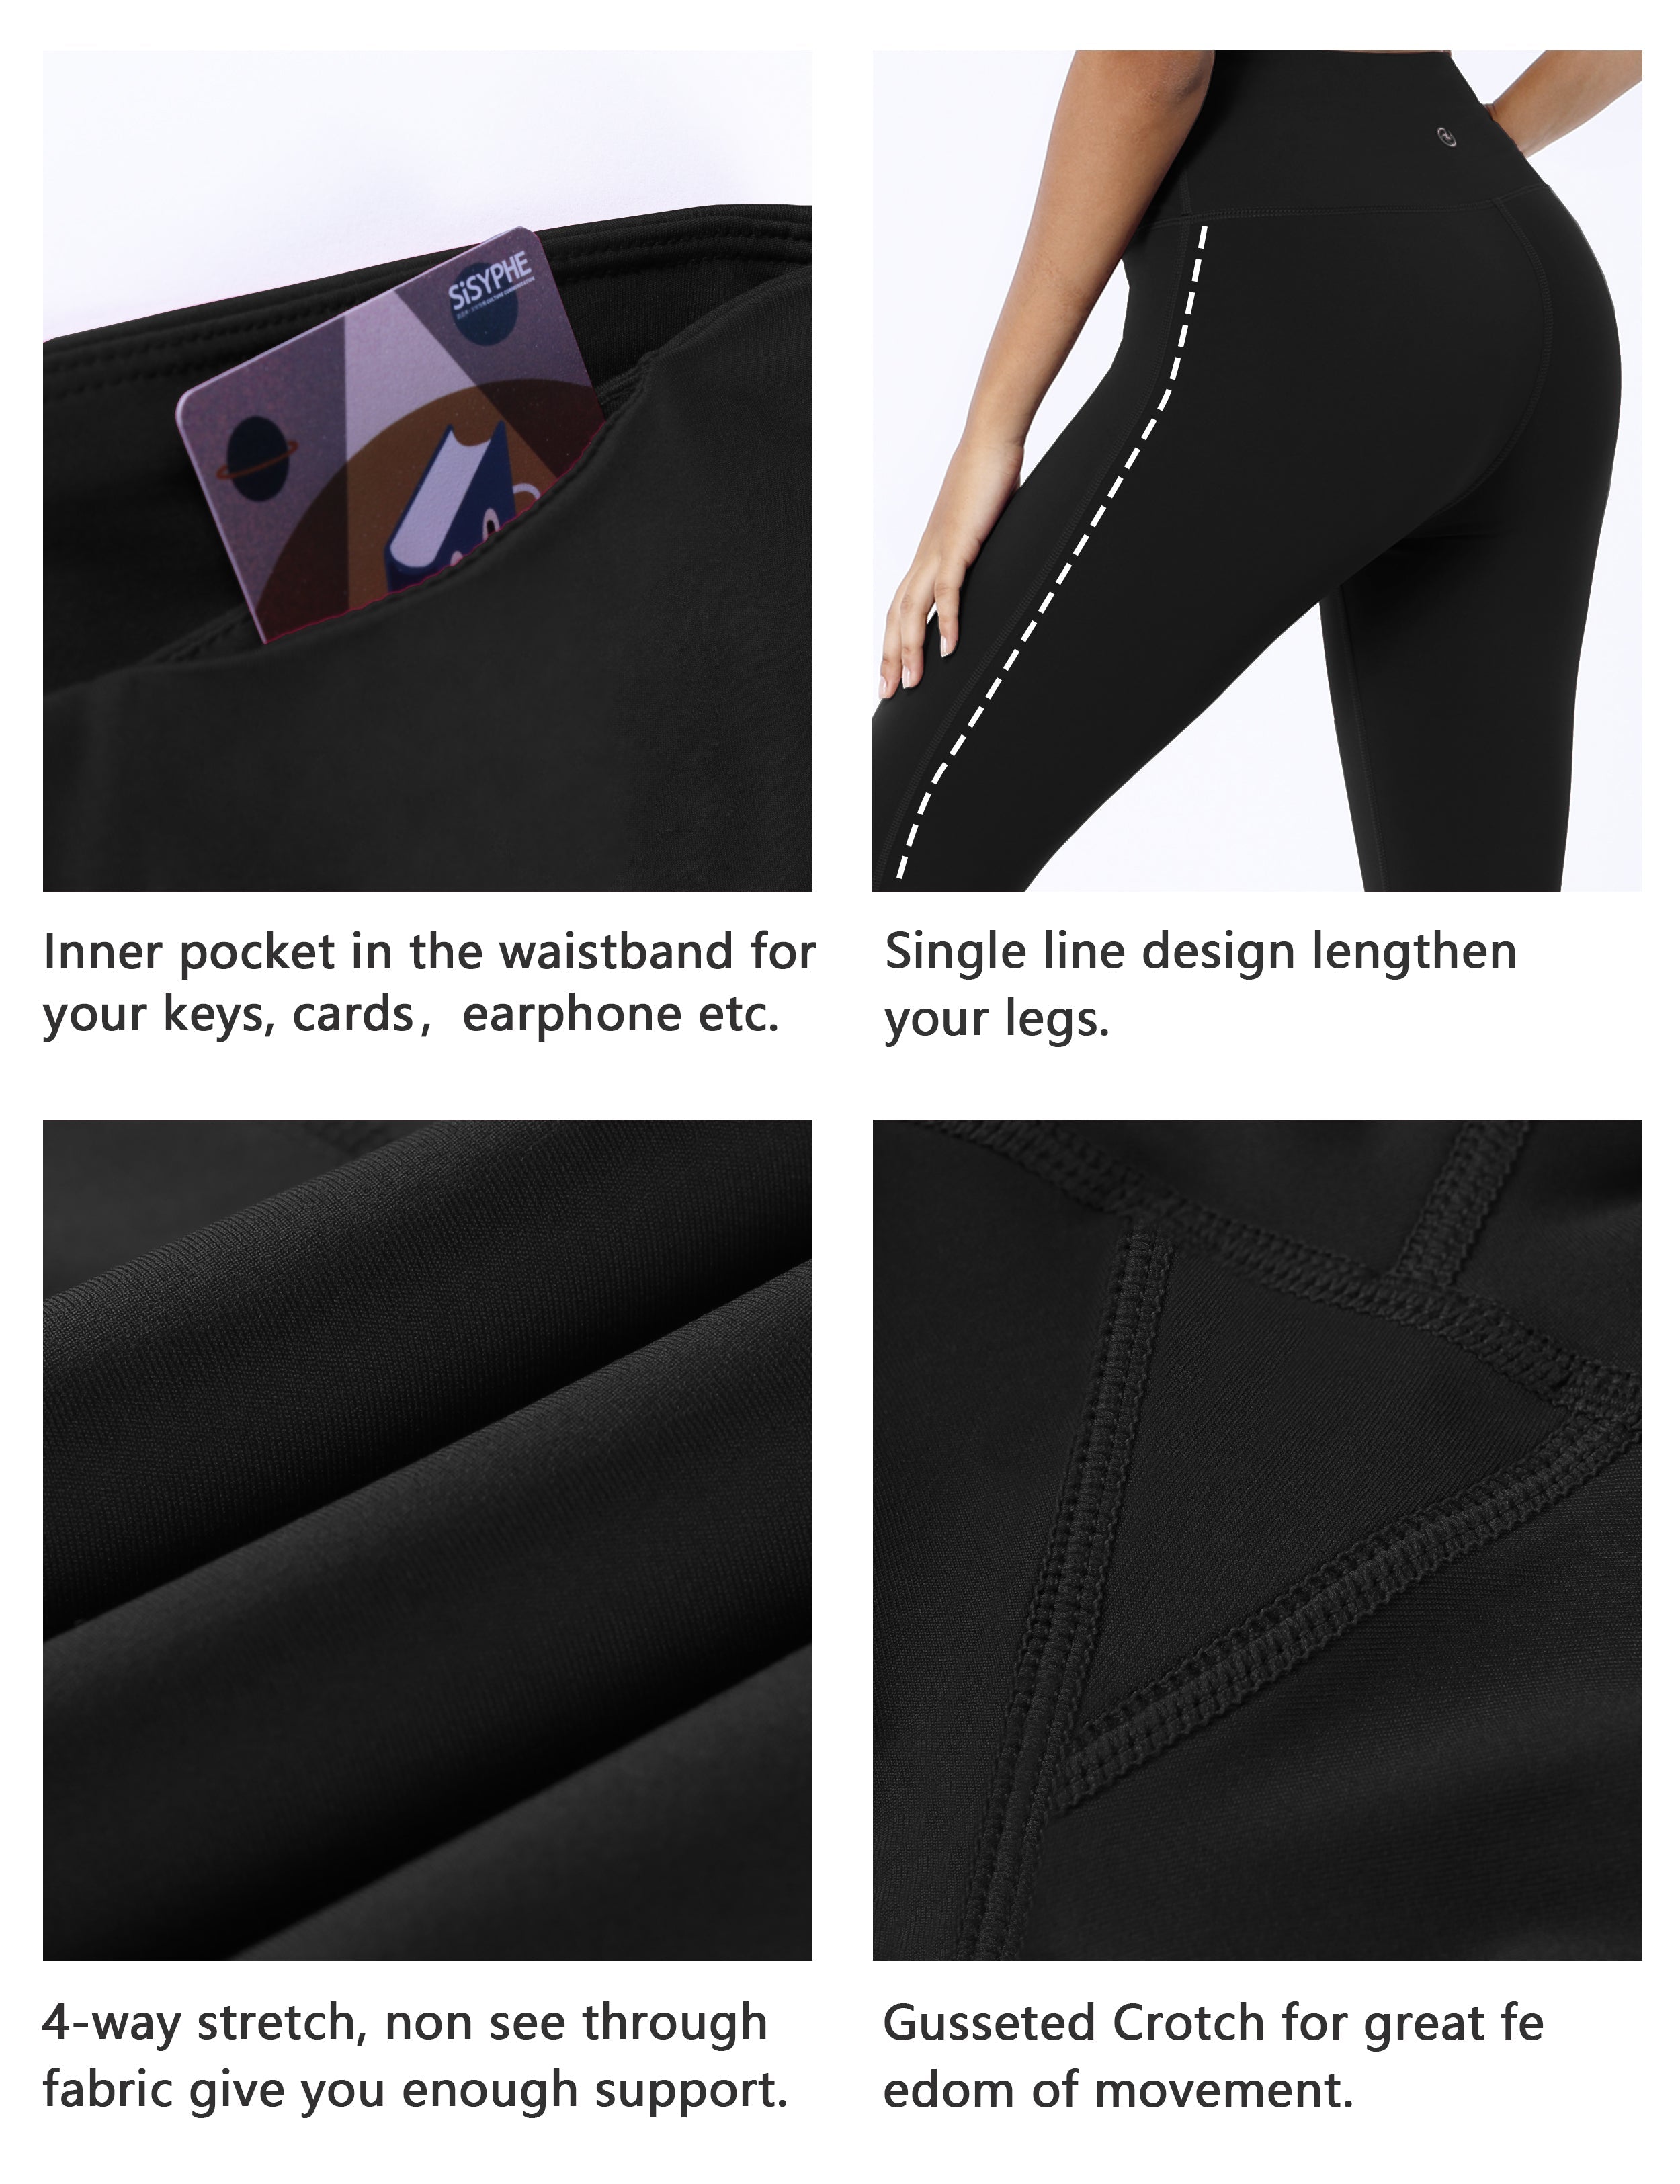 High Waist Side Line Jogging Pants black Side Line is Make Your Legs Look Longer and Thinner 75%Nylon/25%Spandex Fabric doesn't attract lint easily 4-way stretch No see-through Moisture-wicking Tummy control Inner pocket Two lengths